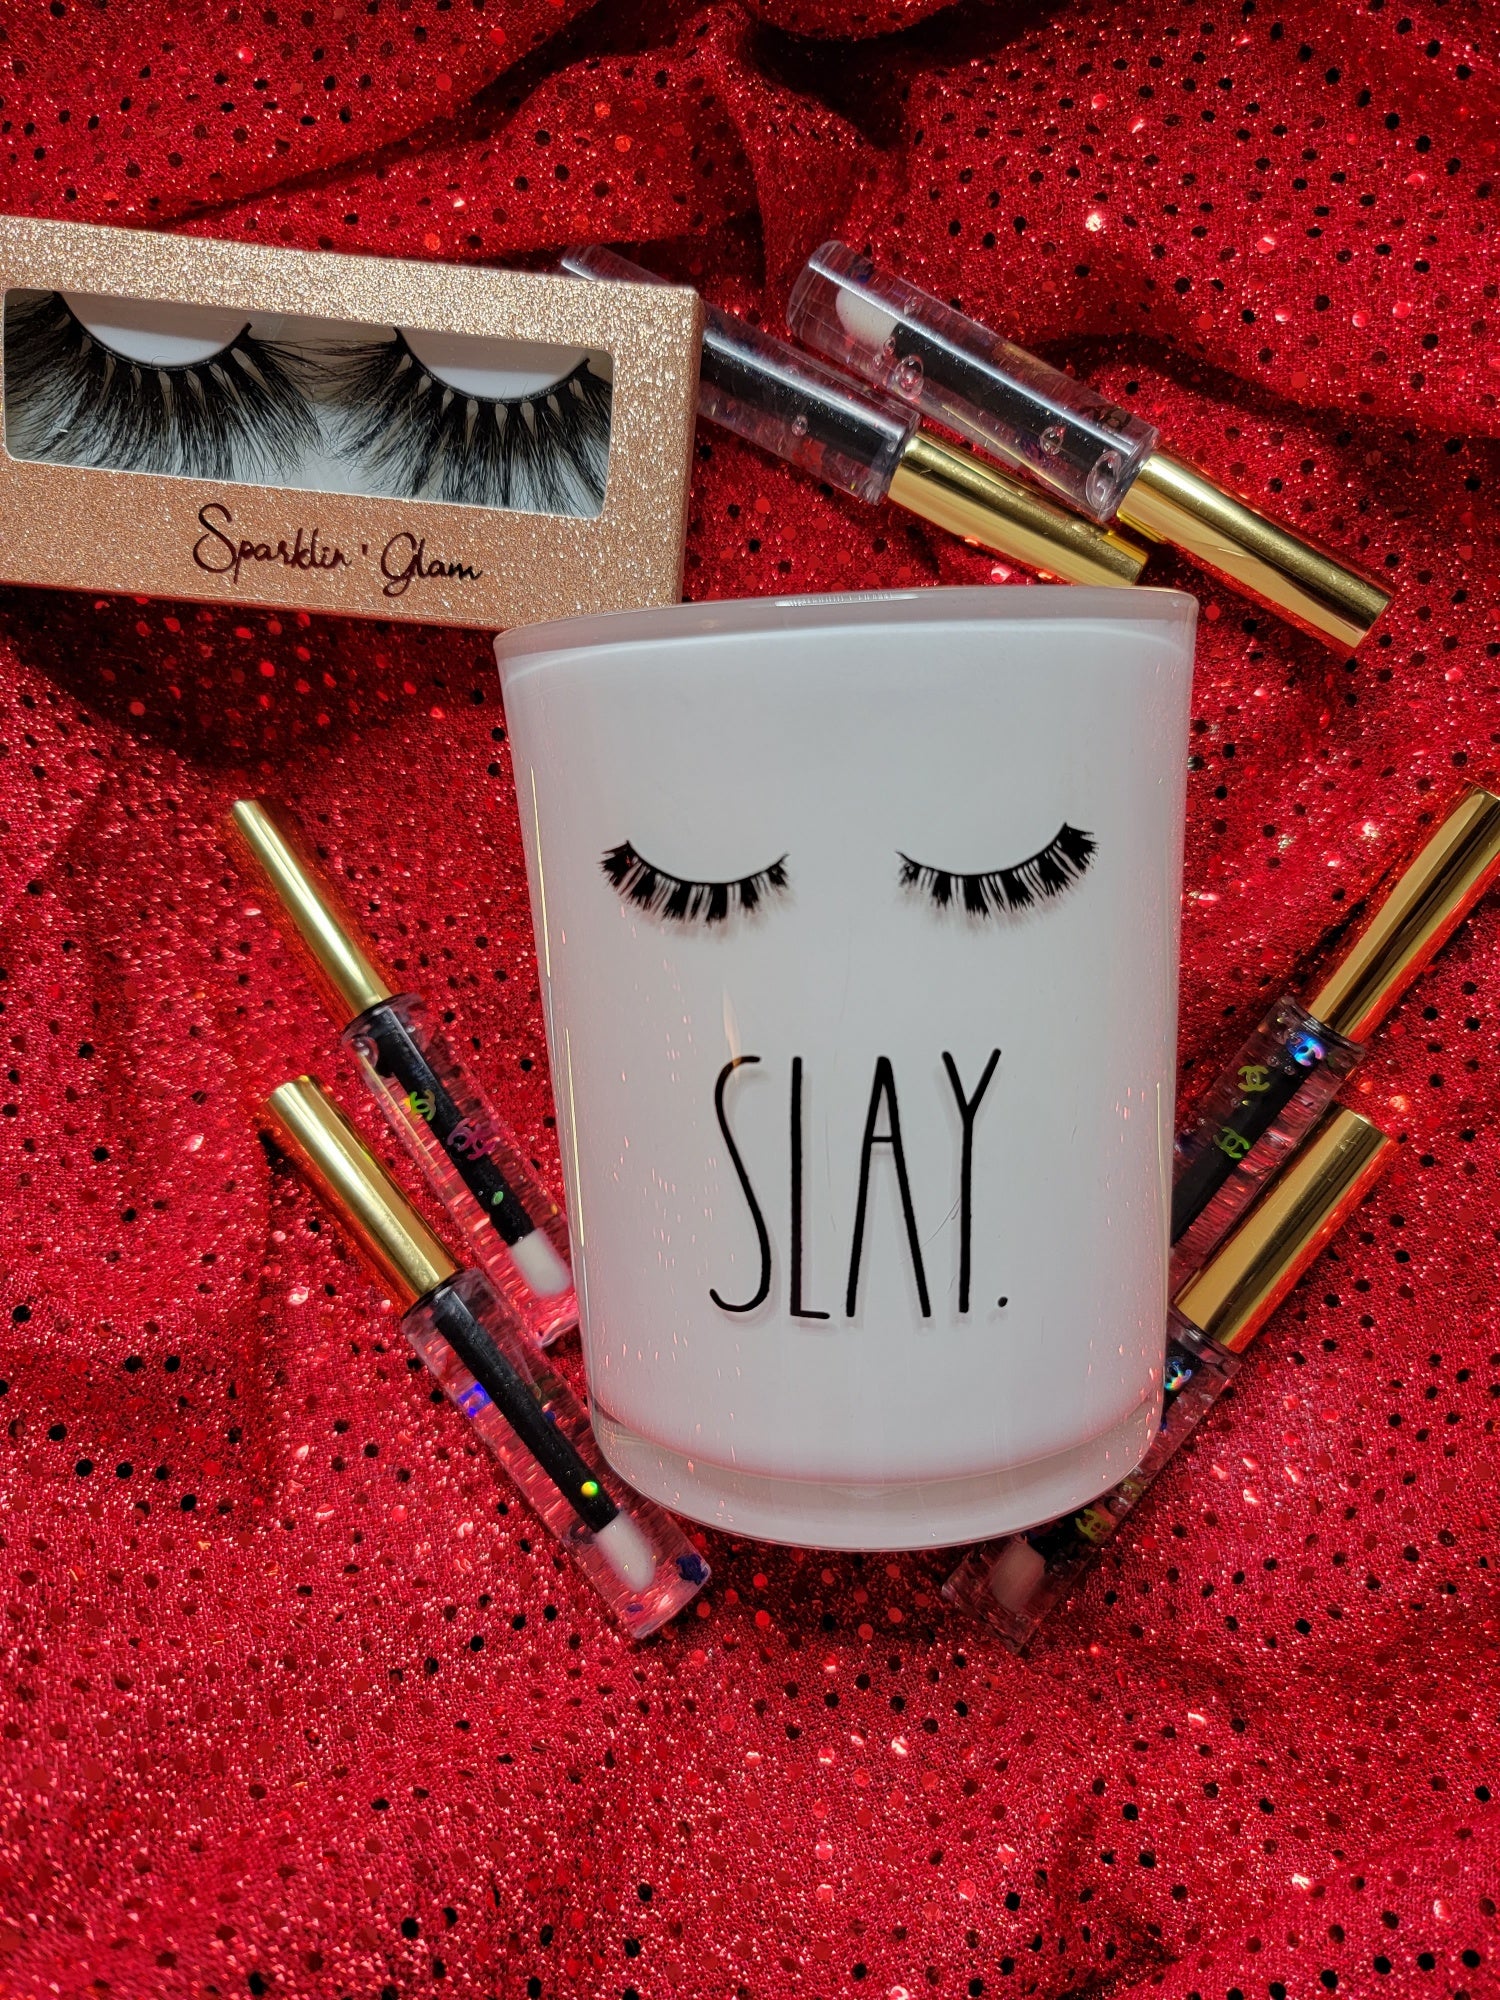 Slay All Day with Lashes and Lips! From Sparklin Glam